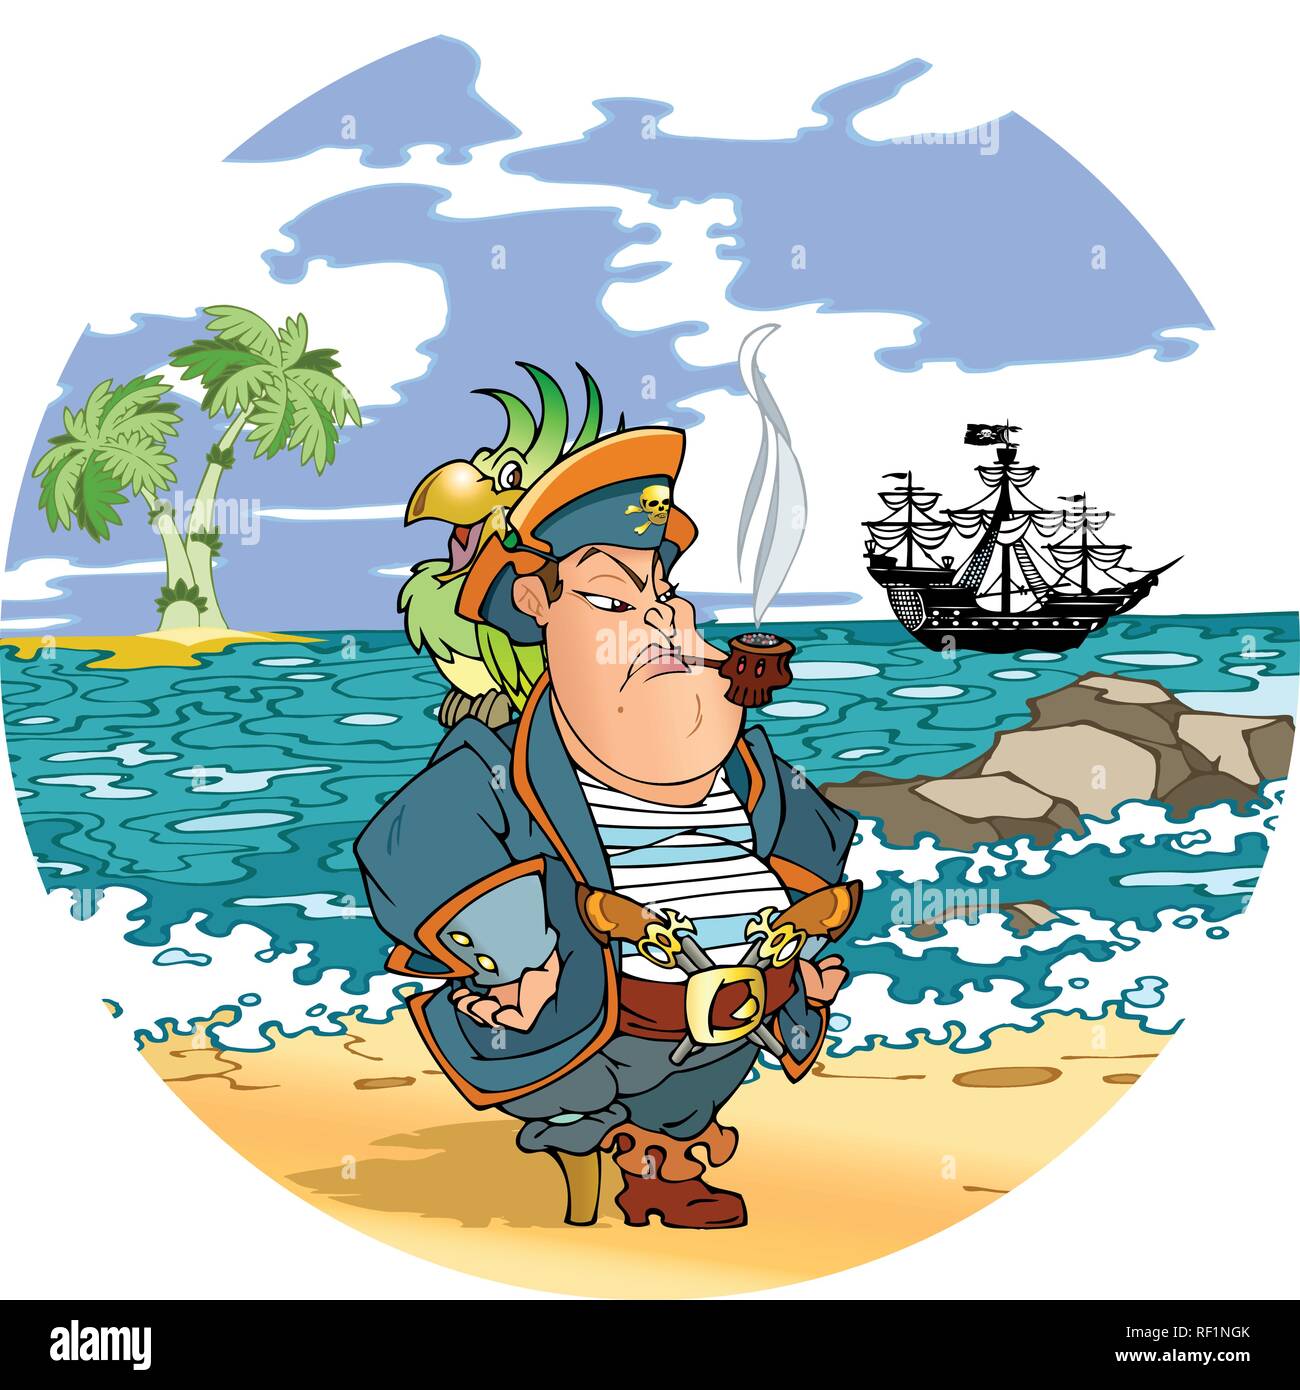 Pirate with a parrot on his shoulder against the backdrop of the sea. Pirate stands on the shore, far seen a pirate ship and palm trees. Stock Vector